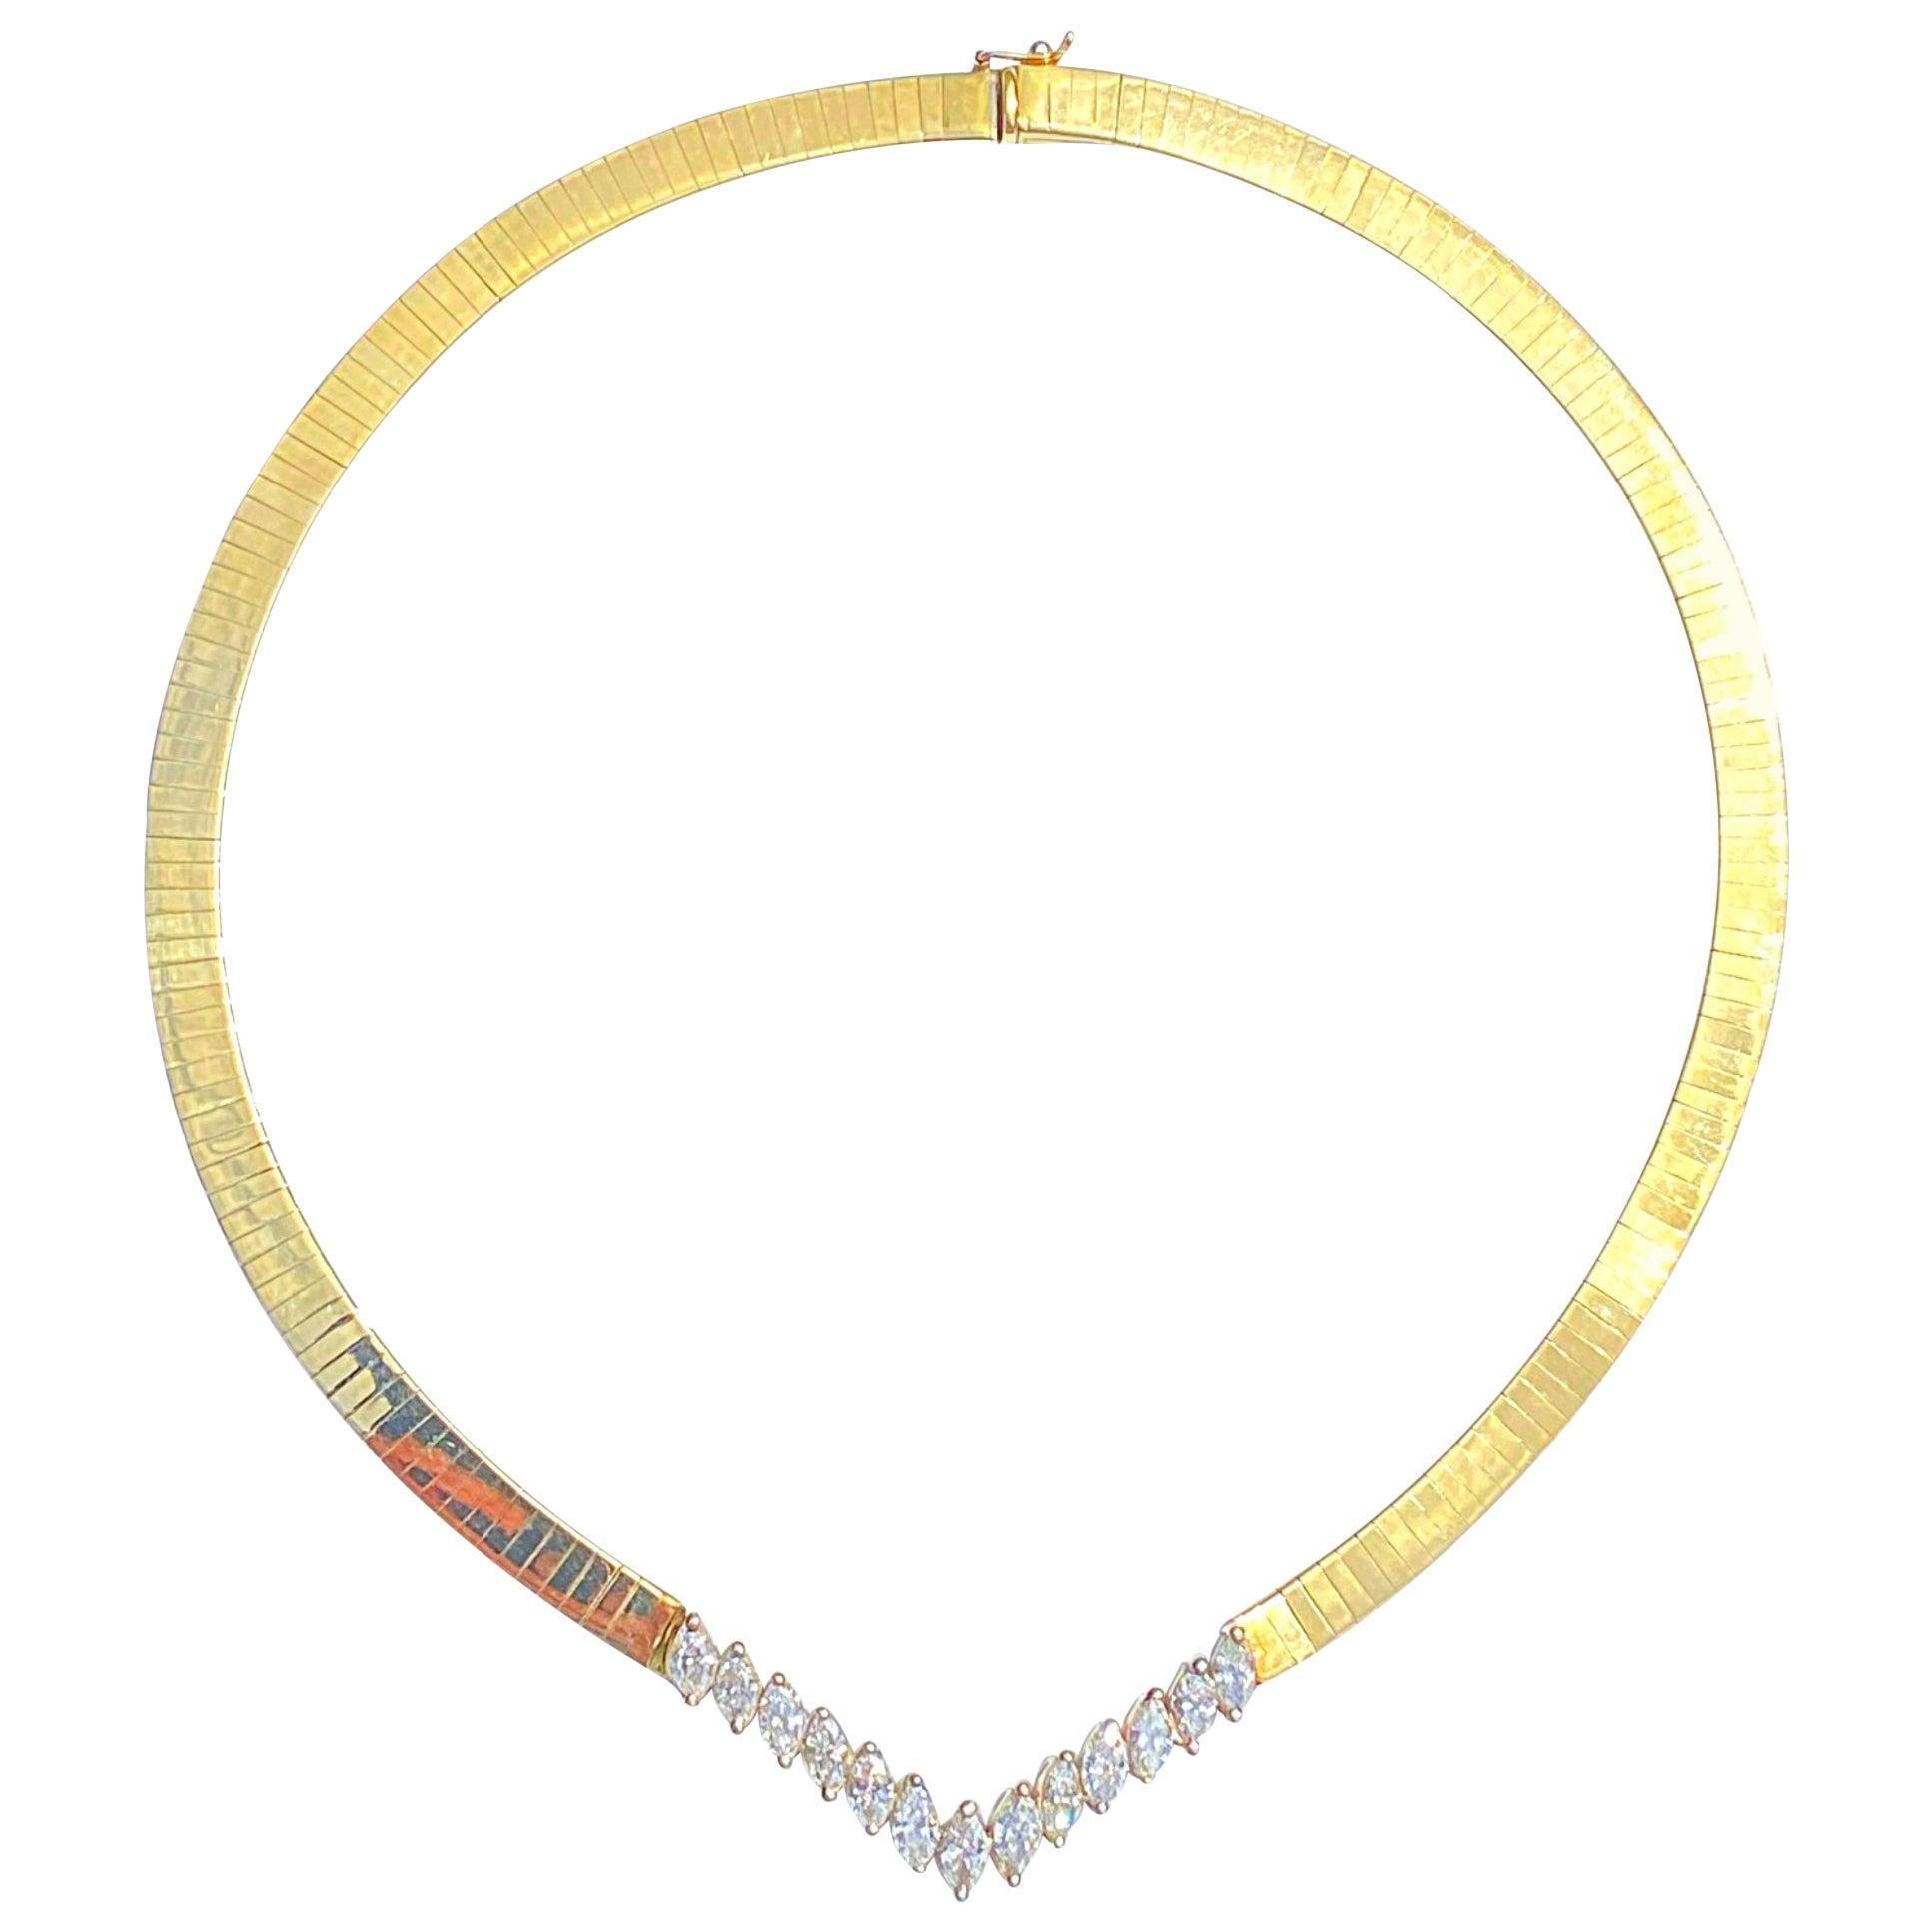 Marquis-Cut Diamond and 14K Yellow Gold Necklace